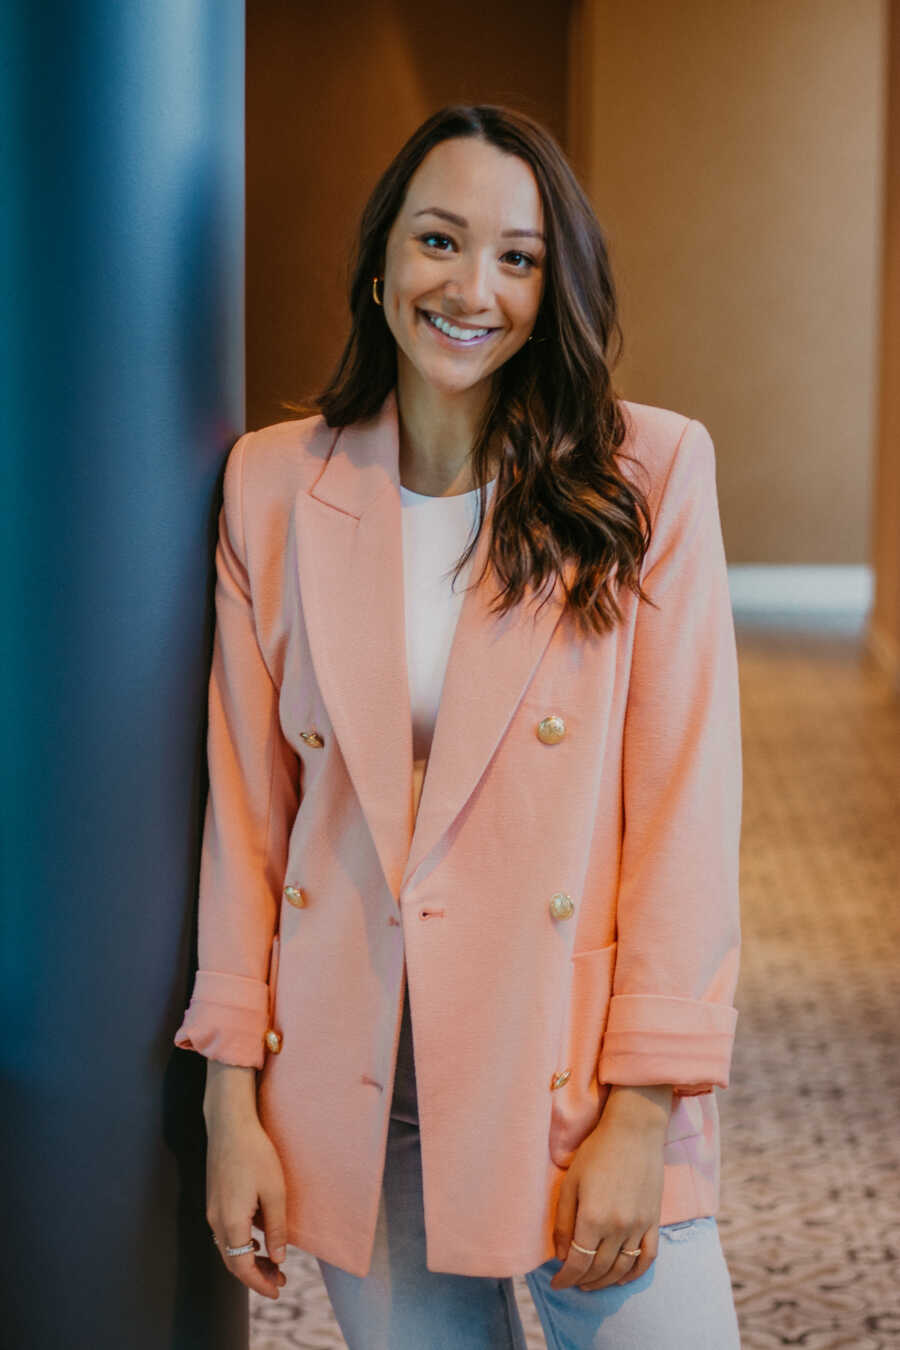 Woman wears pink blazer and takes professional photo.